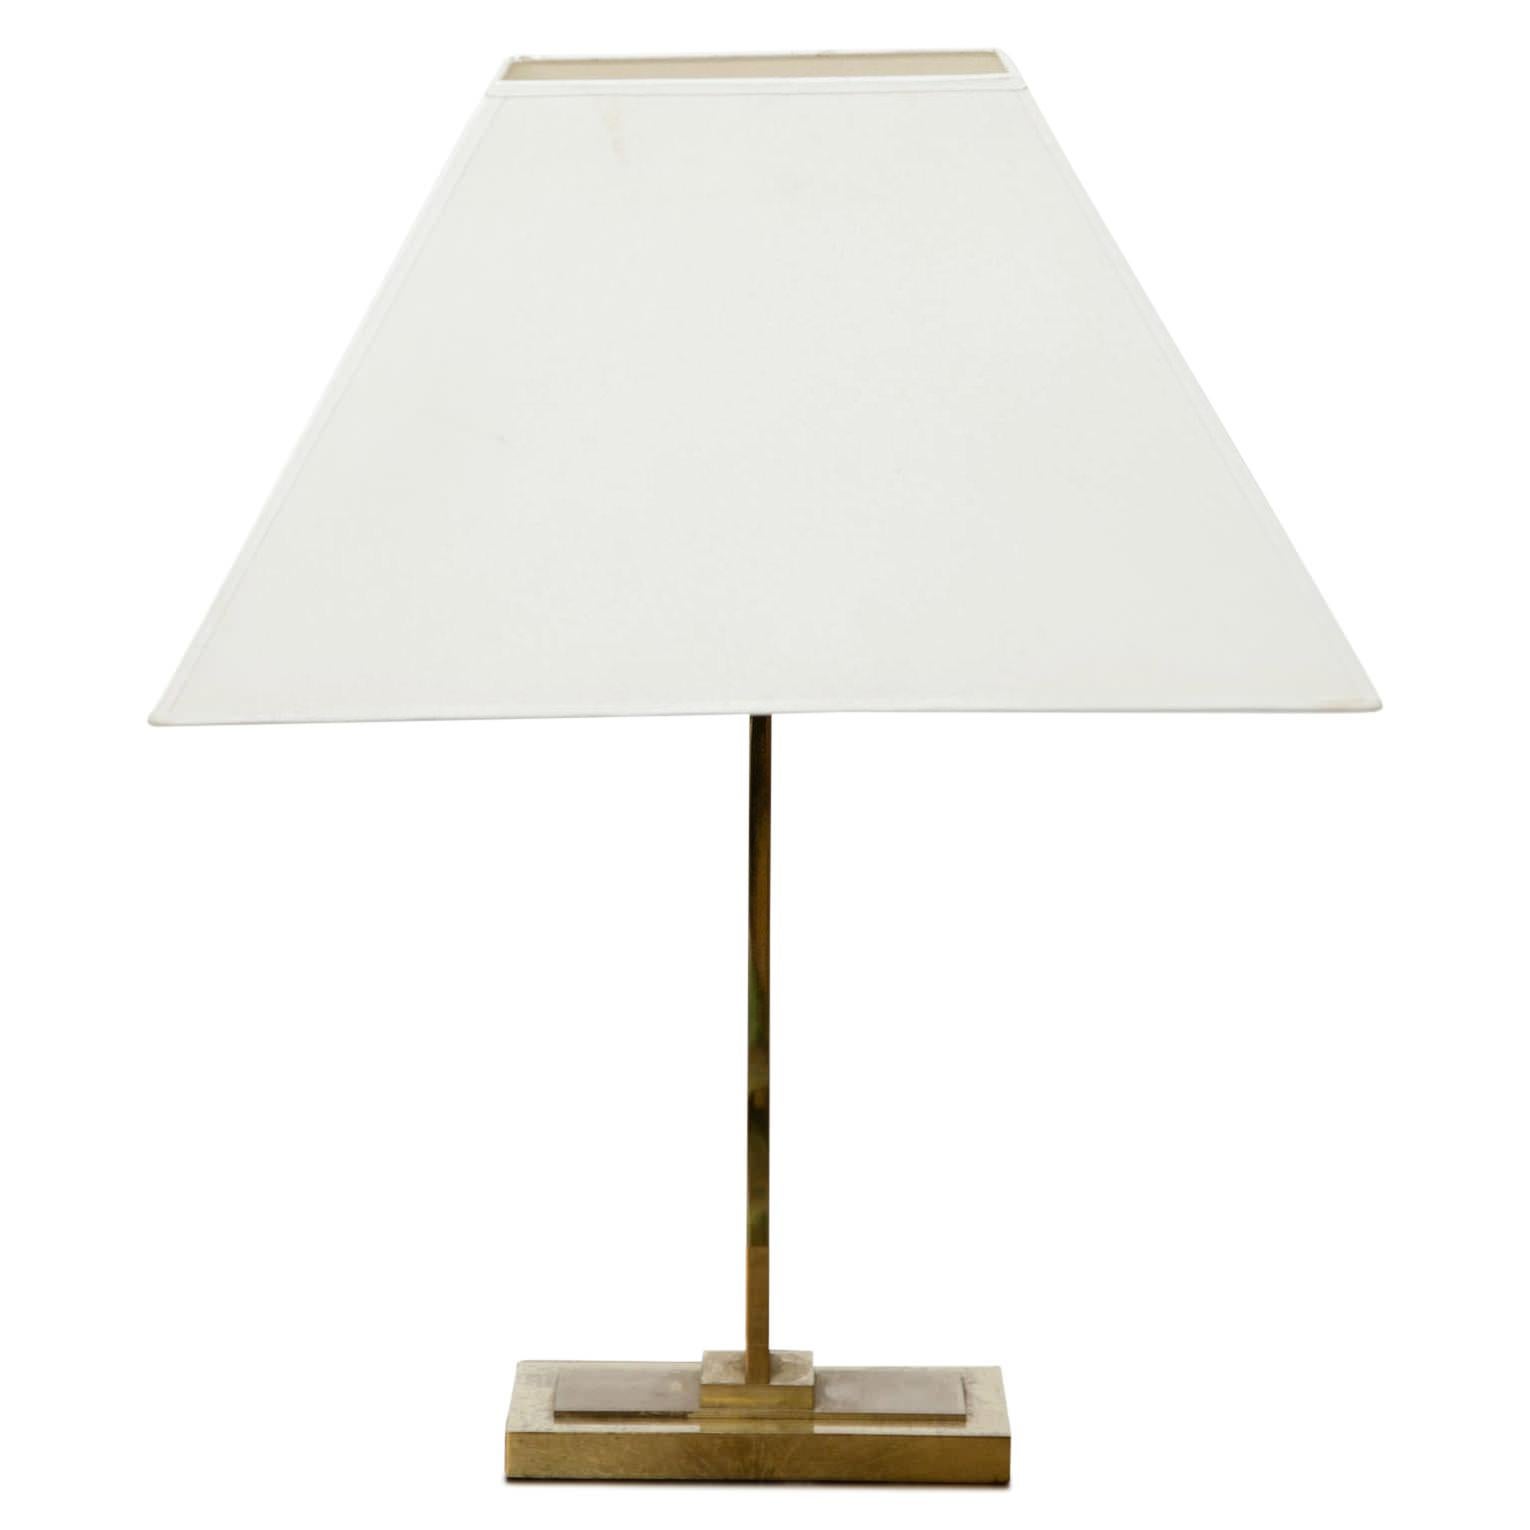 Table lamp with a white cloth lampshade, a rectangular brass foot and a shaft with thick, faceted glass panes. 

For the electrification we assume no liability and no warranty.